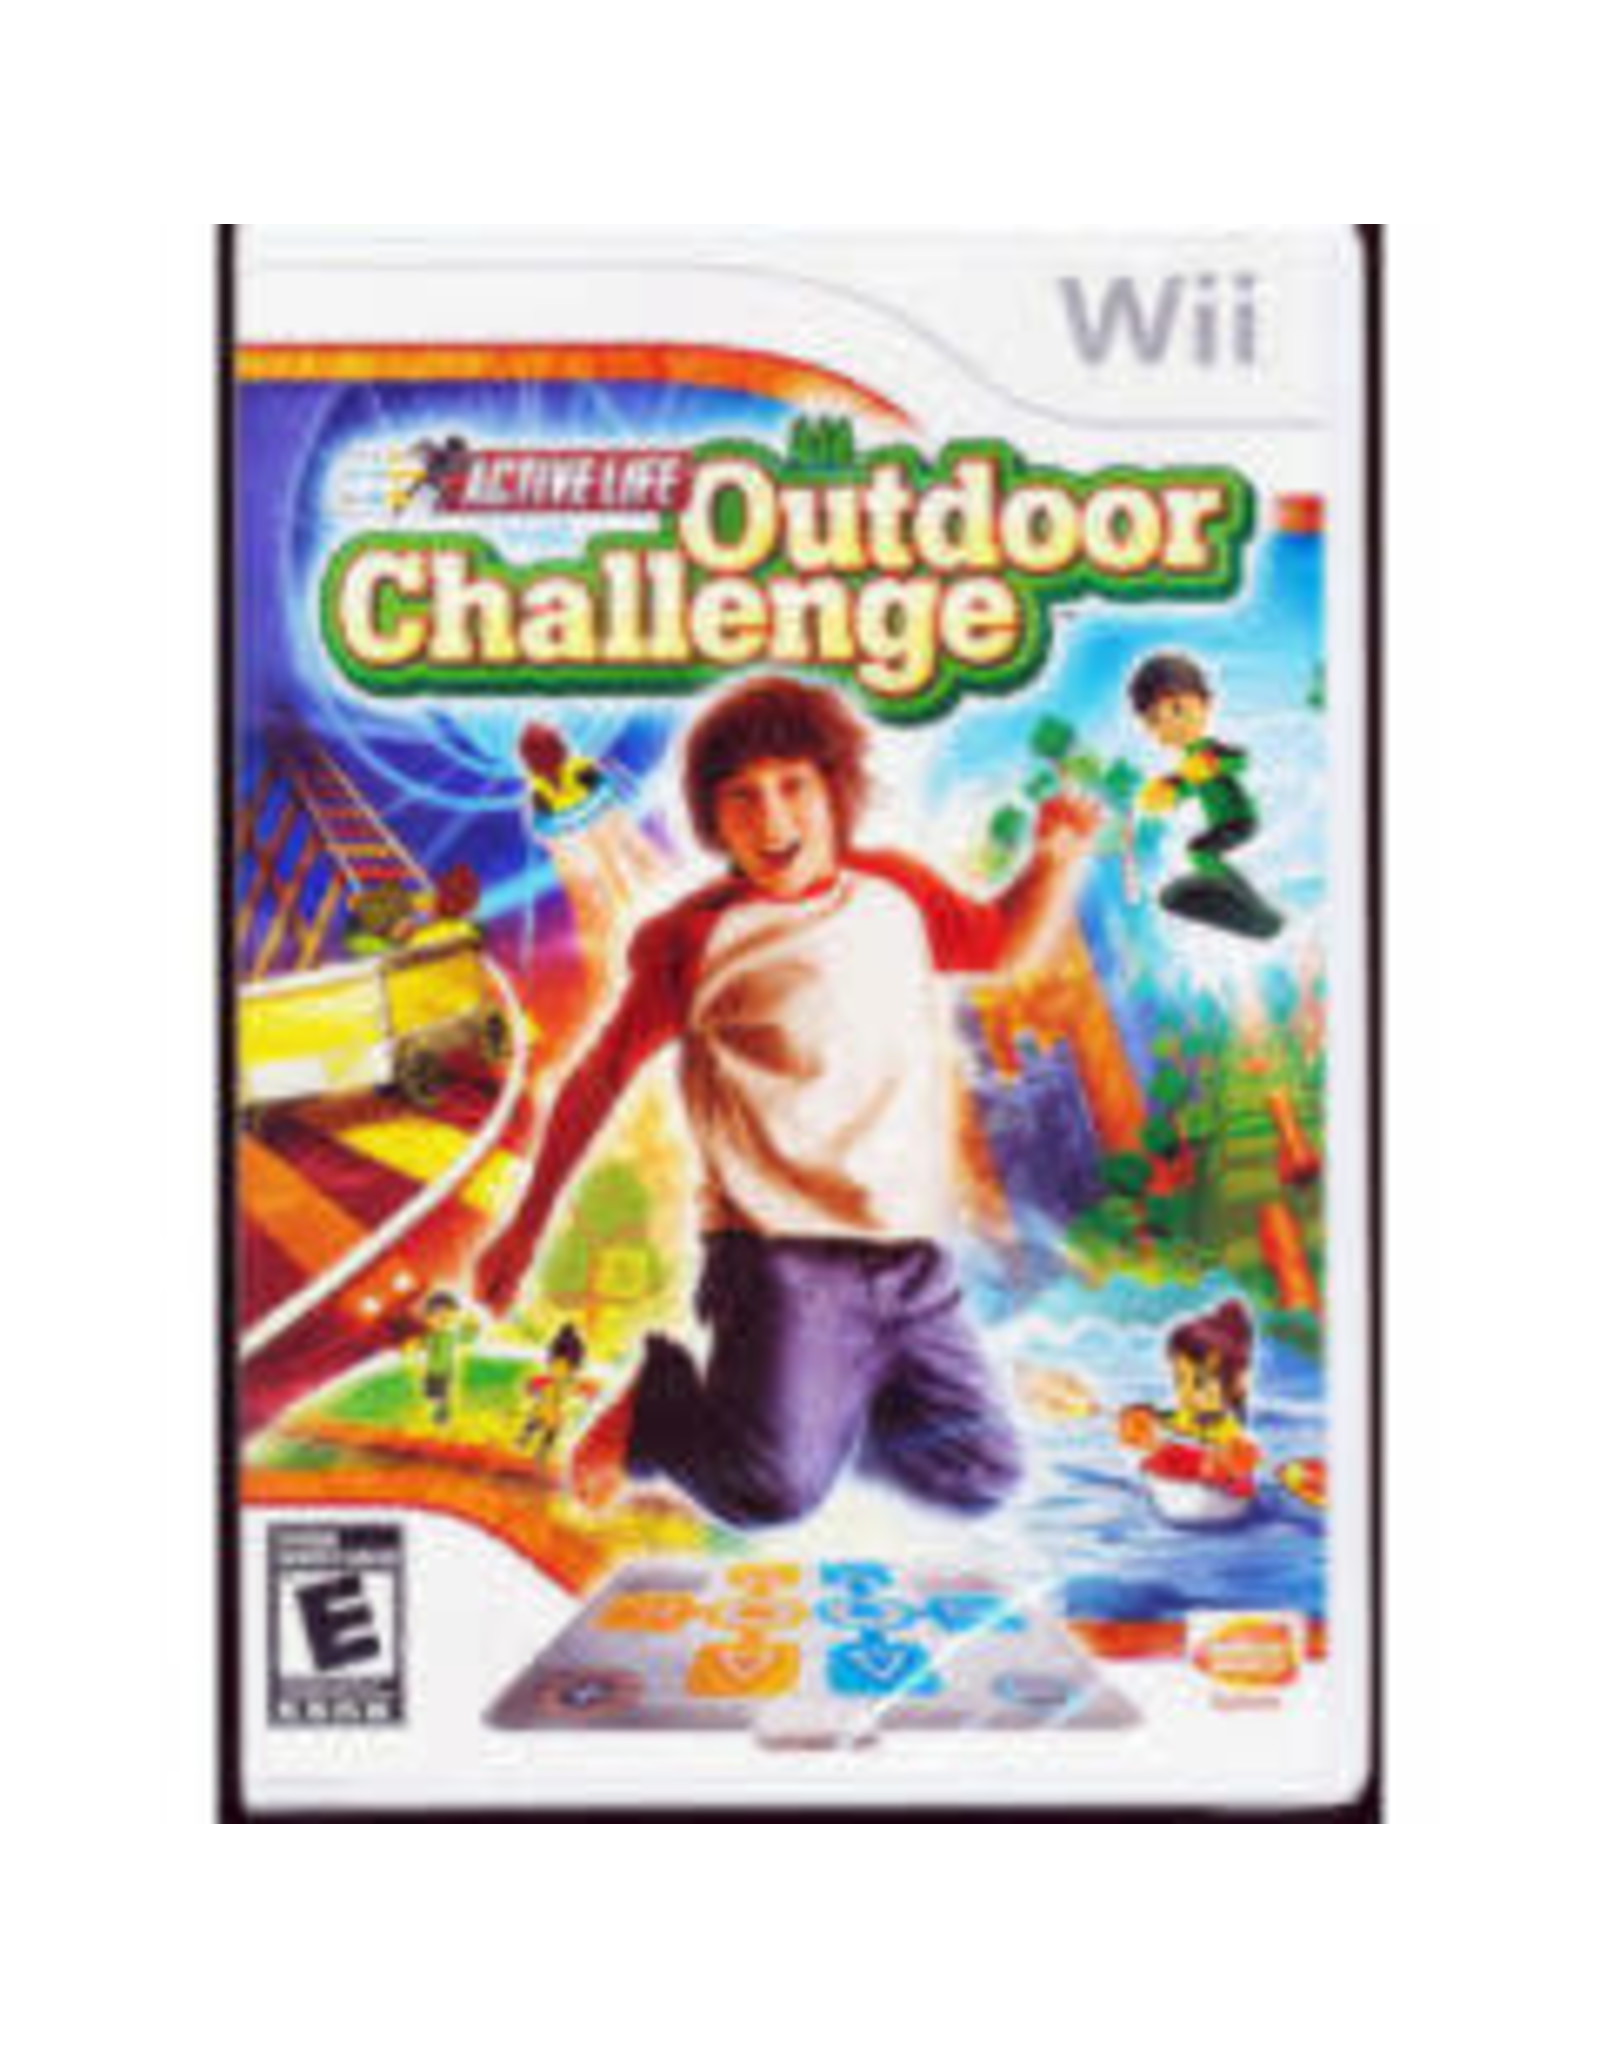 Wii Active Life Outdoor Challenge (No Manual) *Active Life Mat Required*